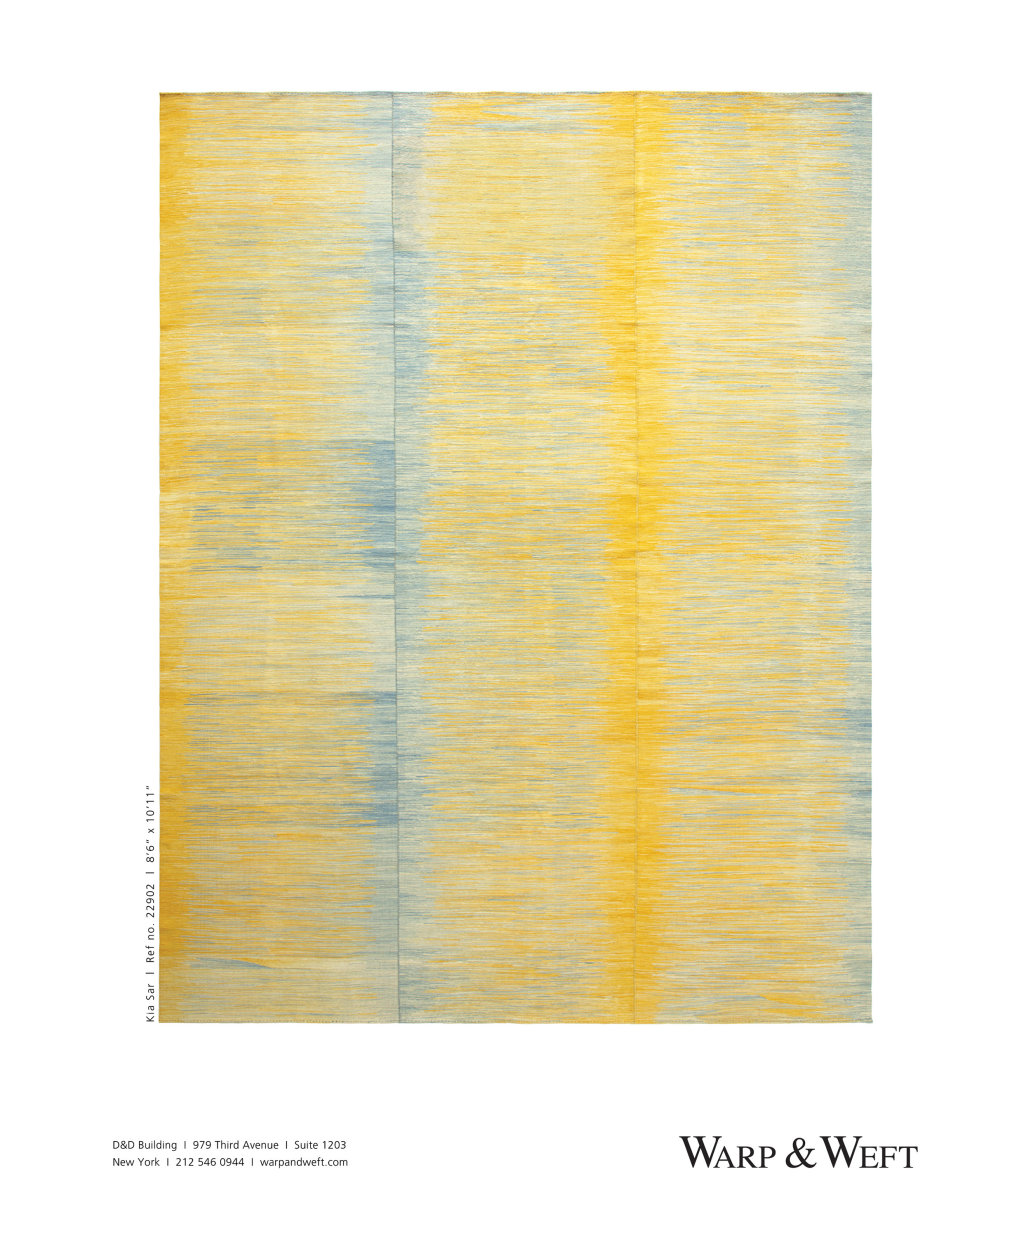 Yellow and blue Wool hand-woven Kia Sar Flatweave Rug featured in Luxe July 2022